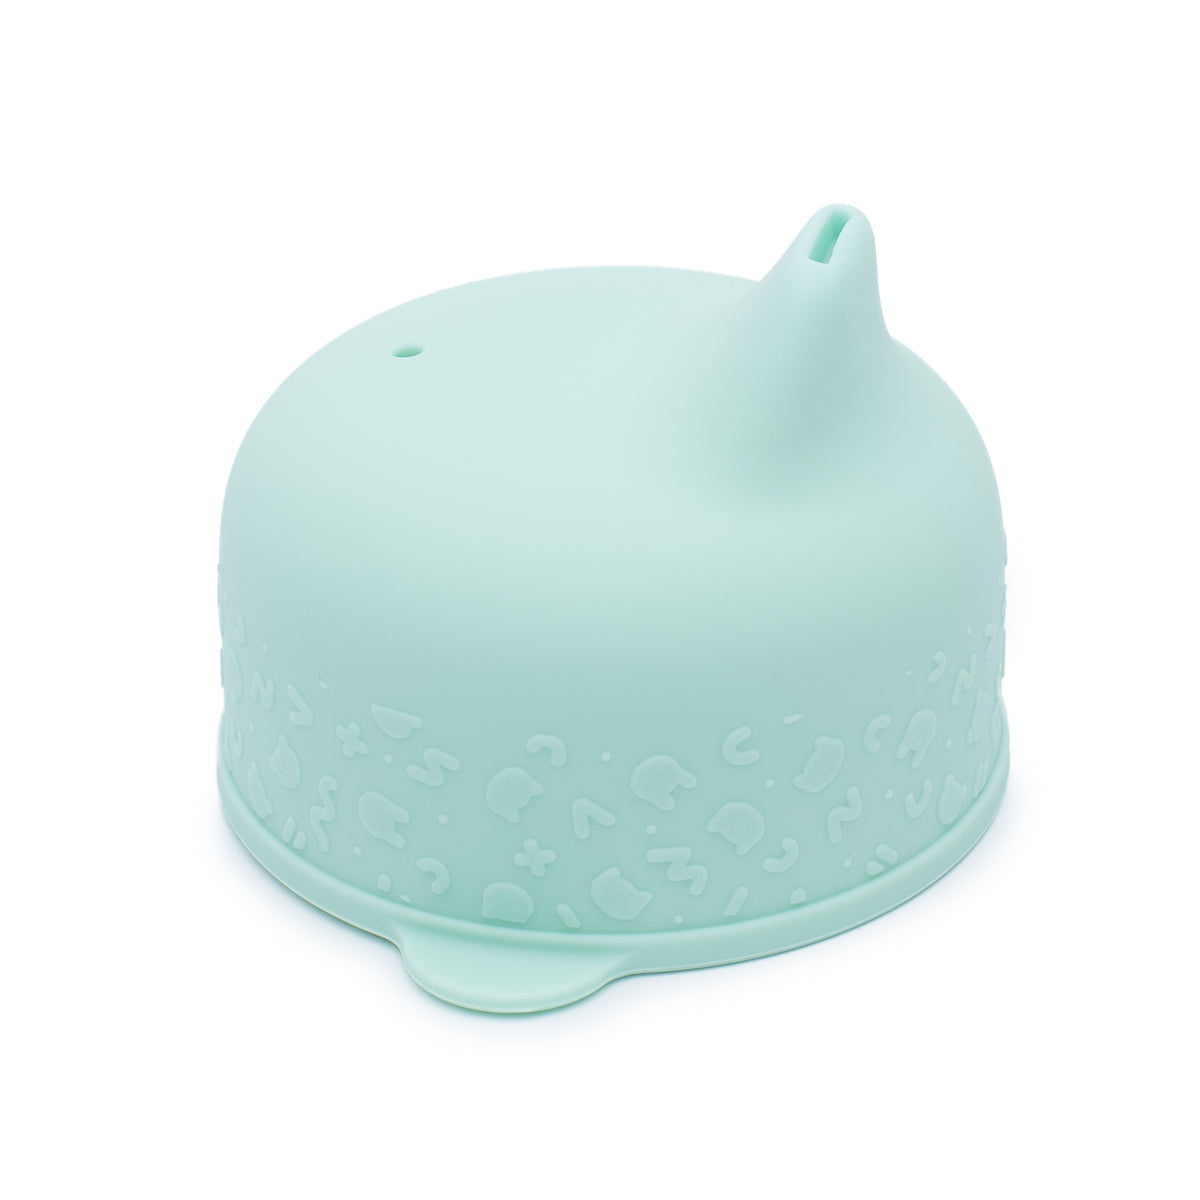 We Might Be Tiny Sippie Lid + Mini Straw - Minty Green